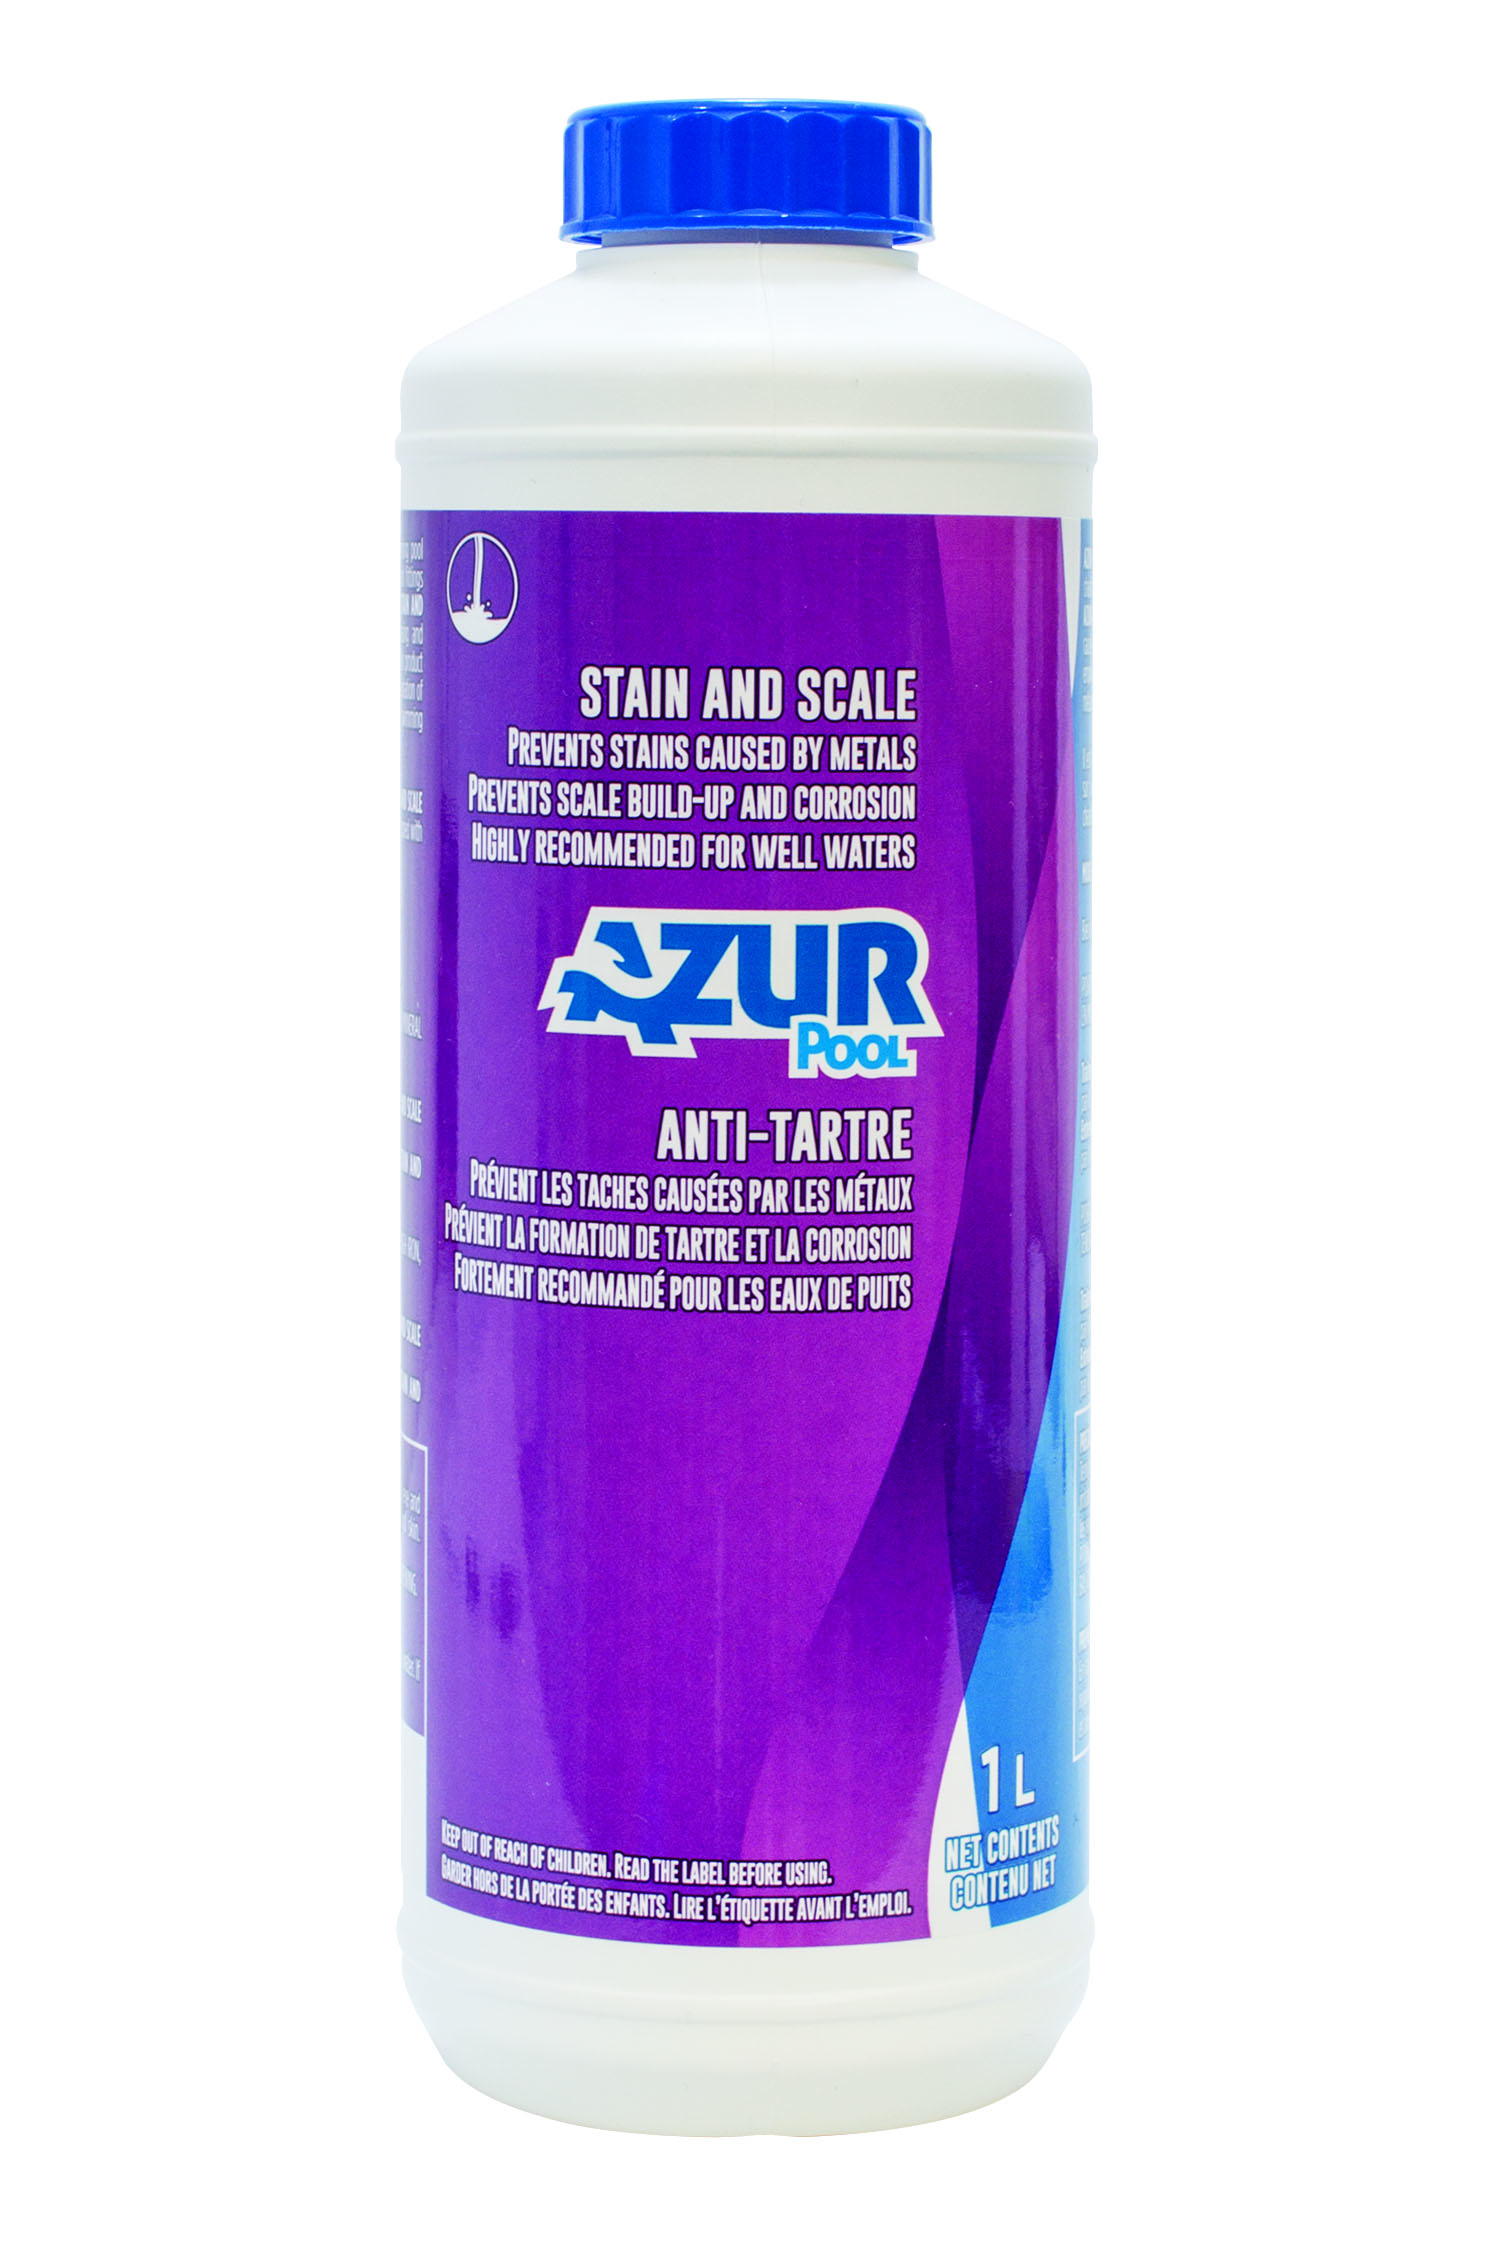 Stain and Scale | Azur Pool